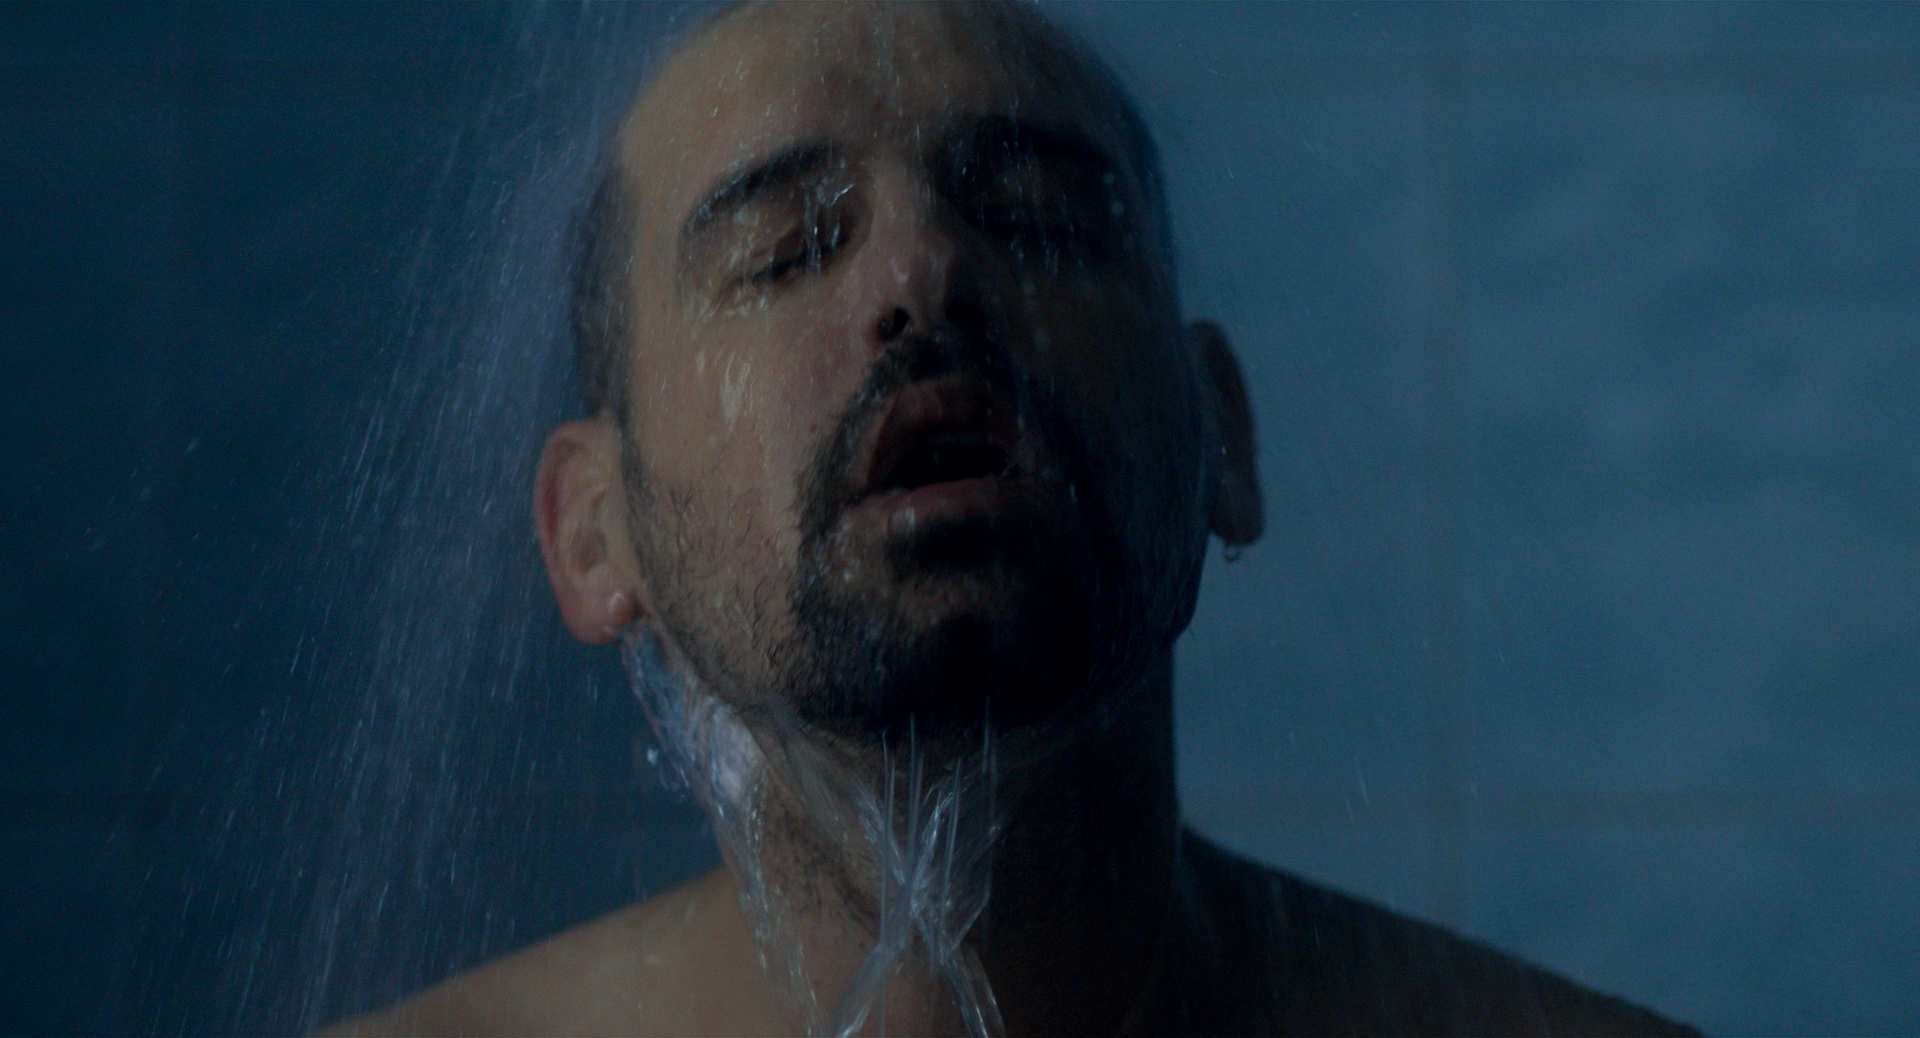 eszter galambos, Still from the short Tiger. Director of Photography, DOP, Cinematographer, operatőr: Eszter Galambos. Director: Péter Hajmási. Colorist: Anna Stalter, Cast: Milán SchruffMan having a shower. Water is falling down. Moody environment. Blue tiles. Tigris/TIGER short movie. Cinematographer: Eszter Galambos